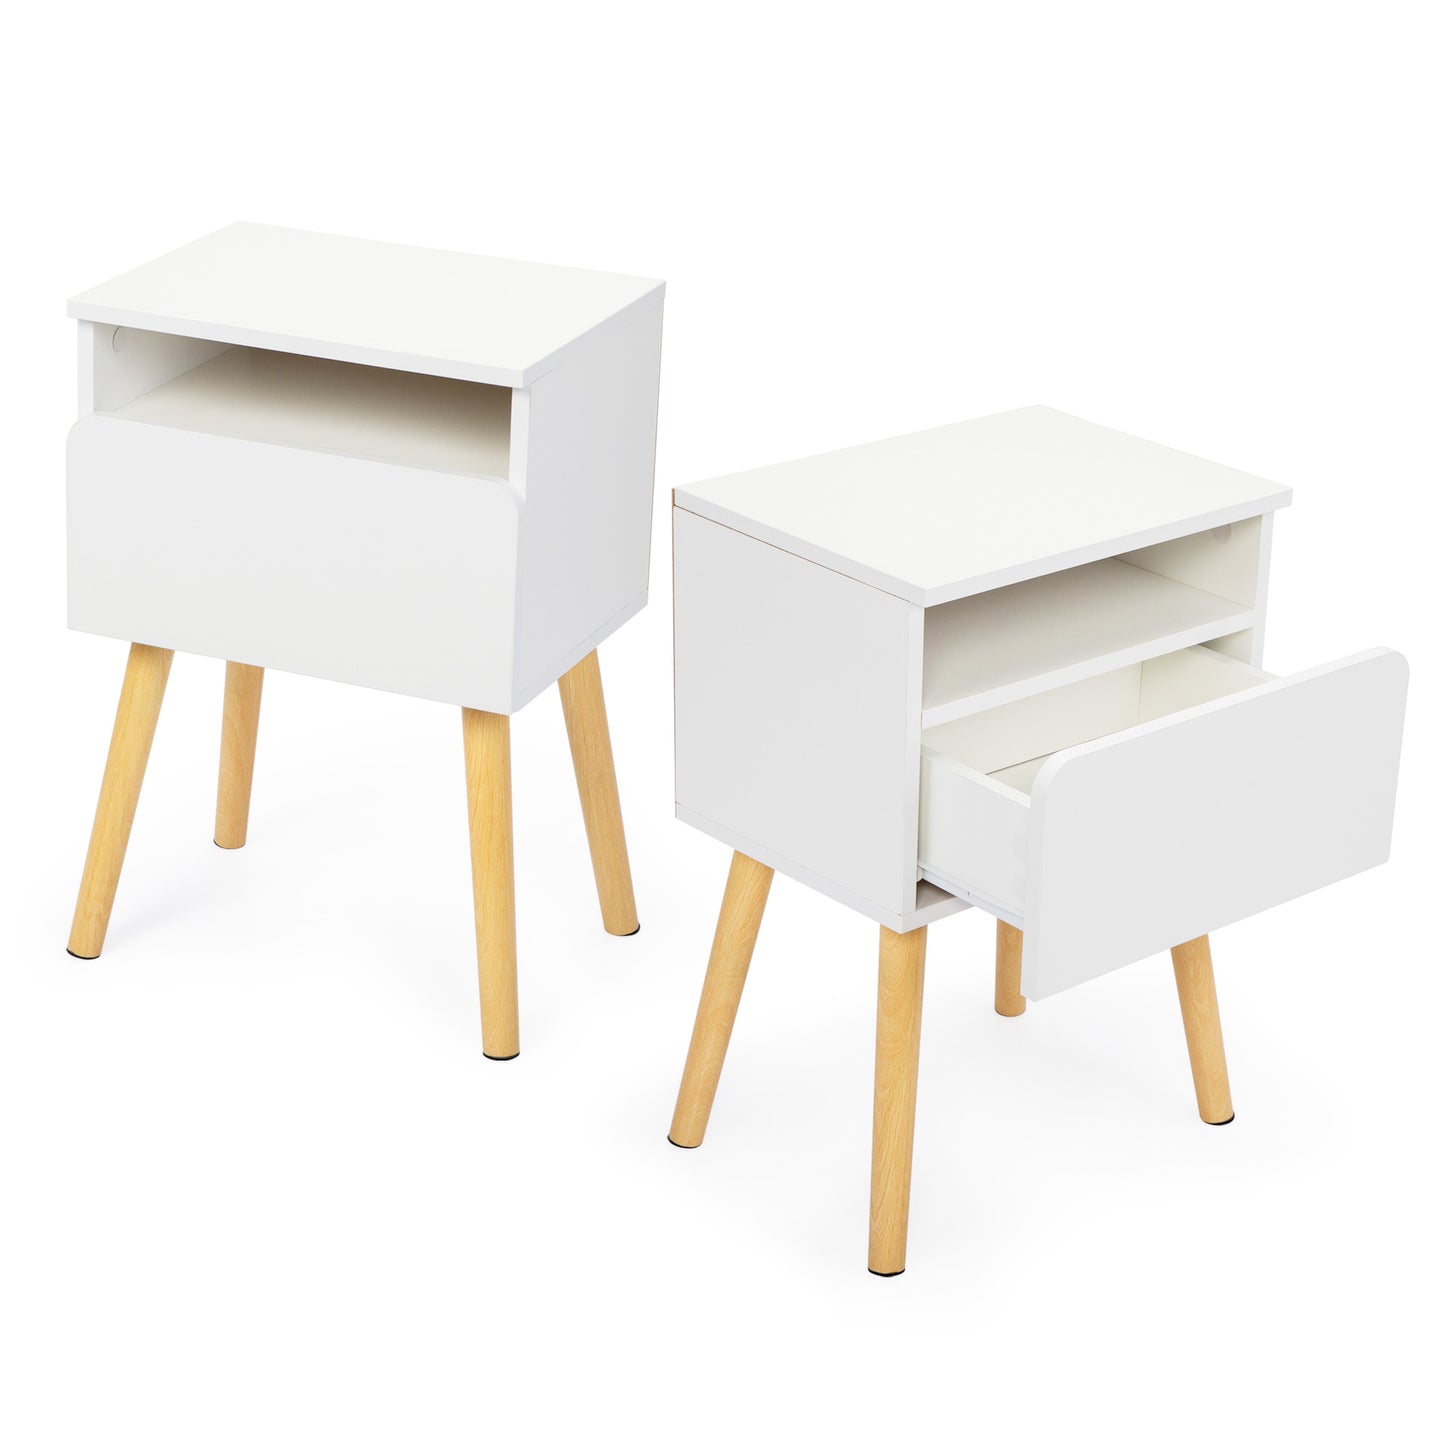 End Table Set of 2, Bed Side Table Nightstand with Drawers, Bedside Table for Bedroom, White